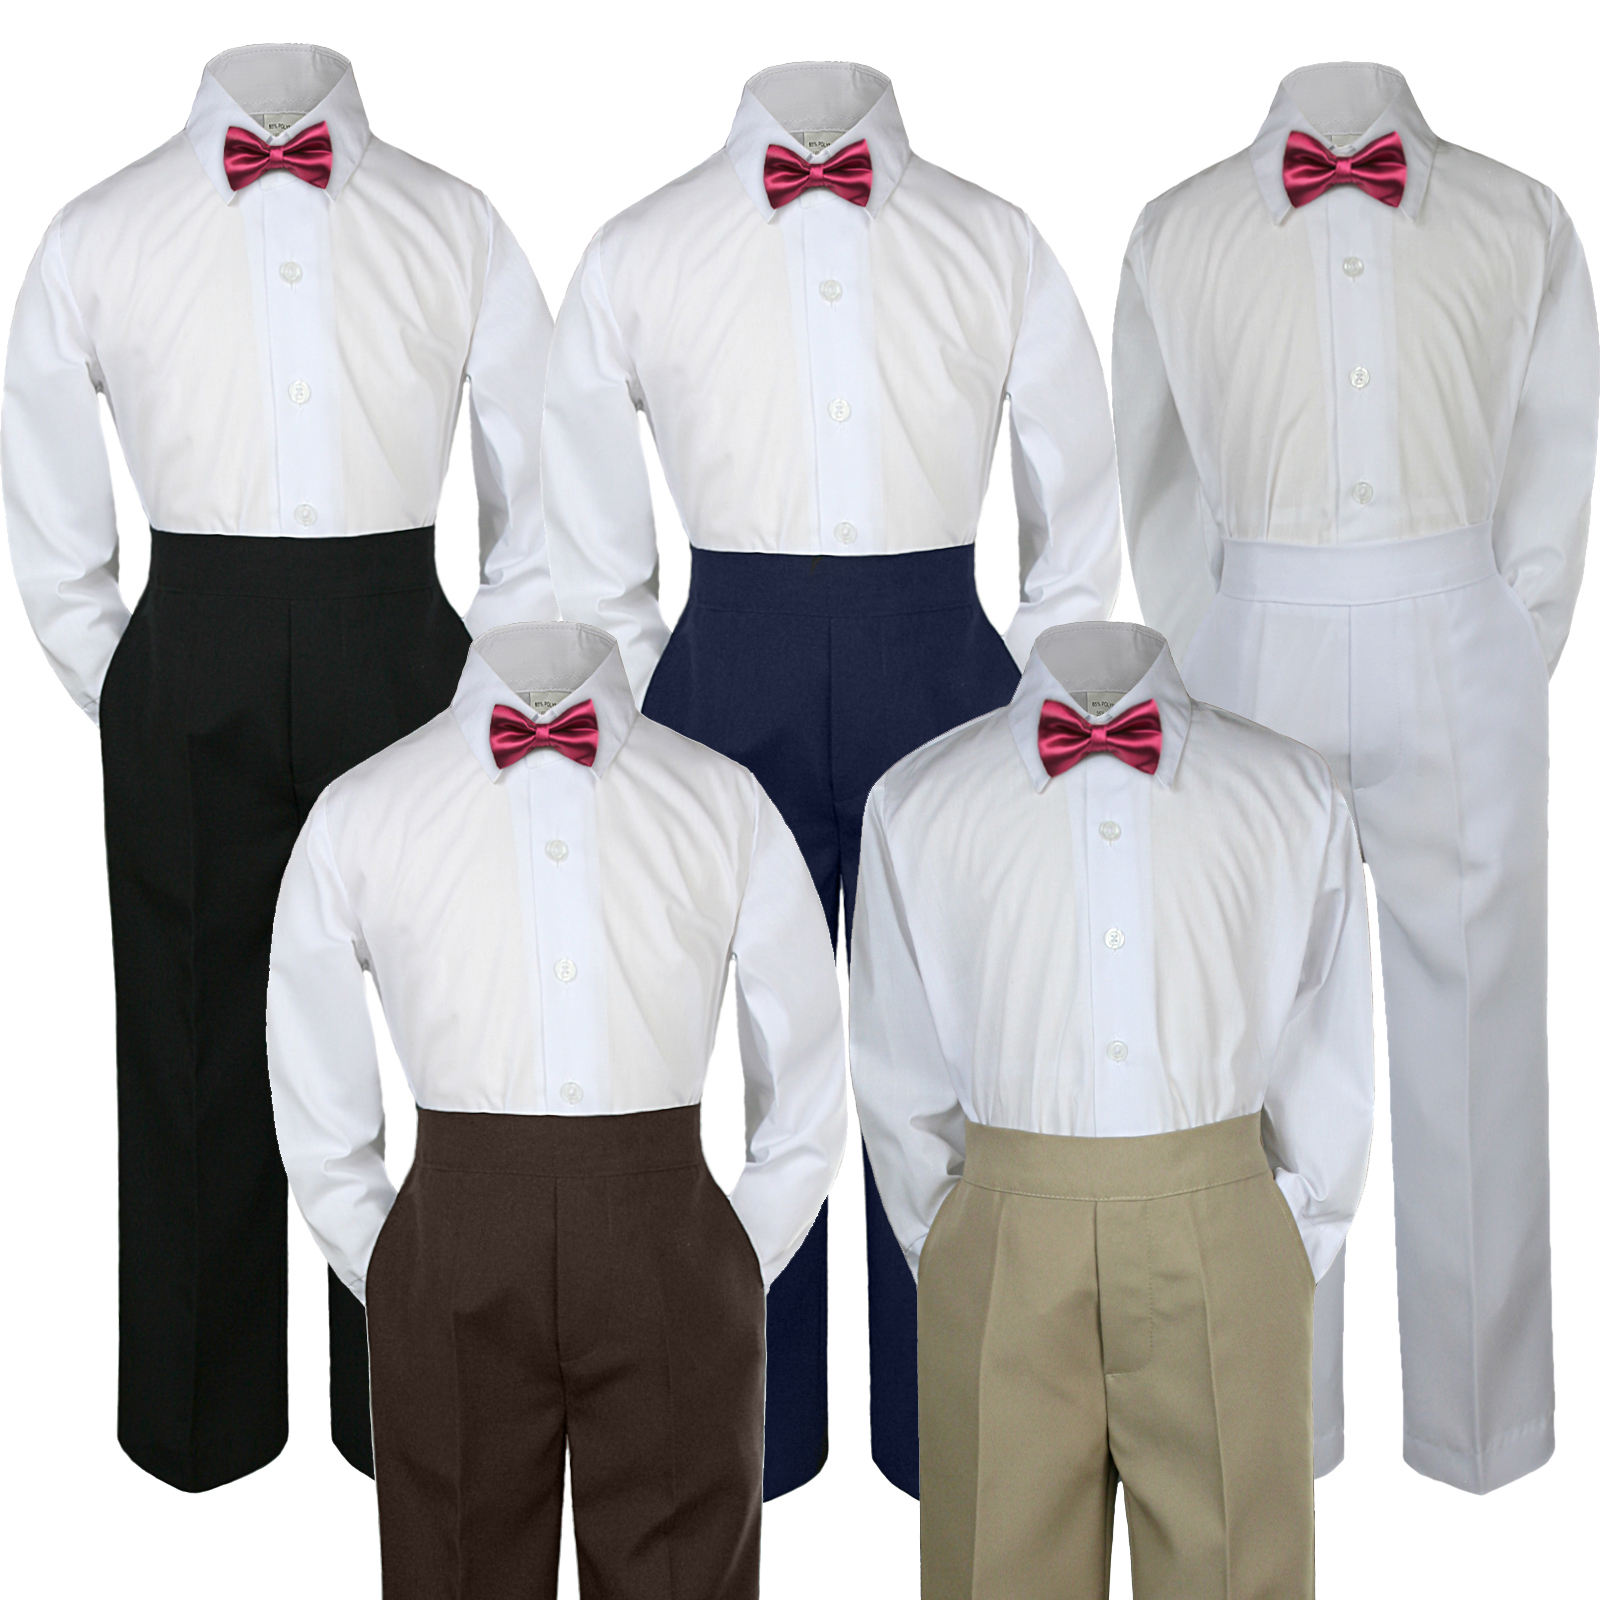 Leadertux 3pc S M L XL 2T 3T 4T Baby Toddler Boys Shirt Pants Suits Tuxedo Formal Wedding Party Outfits Burgundy Maroon Bow Tie